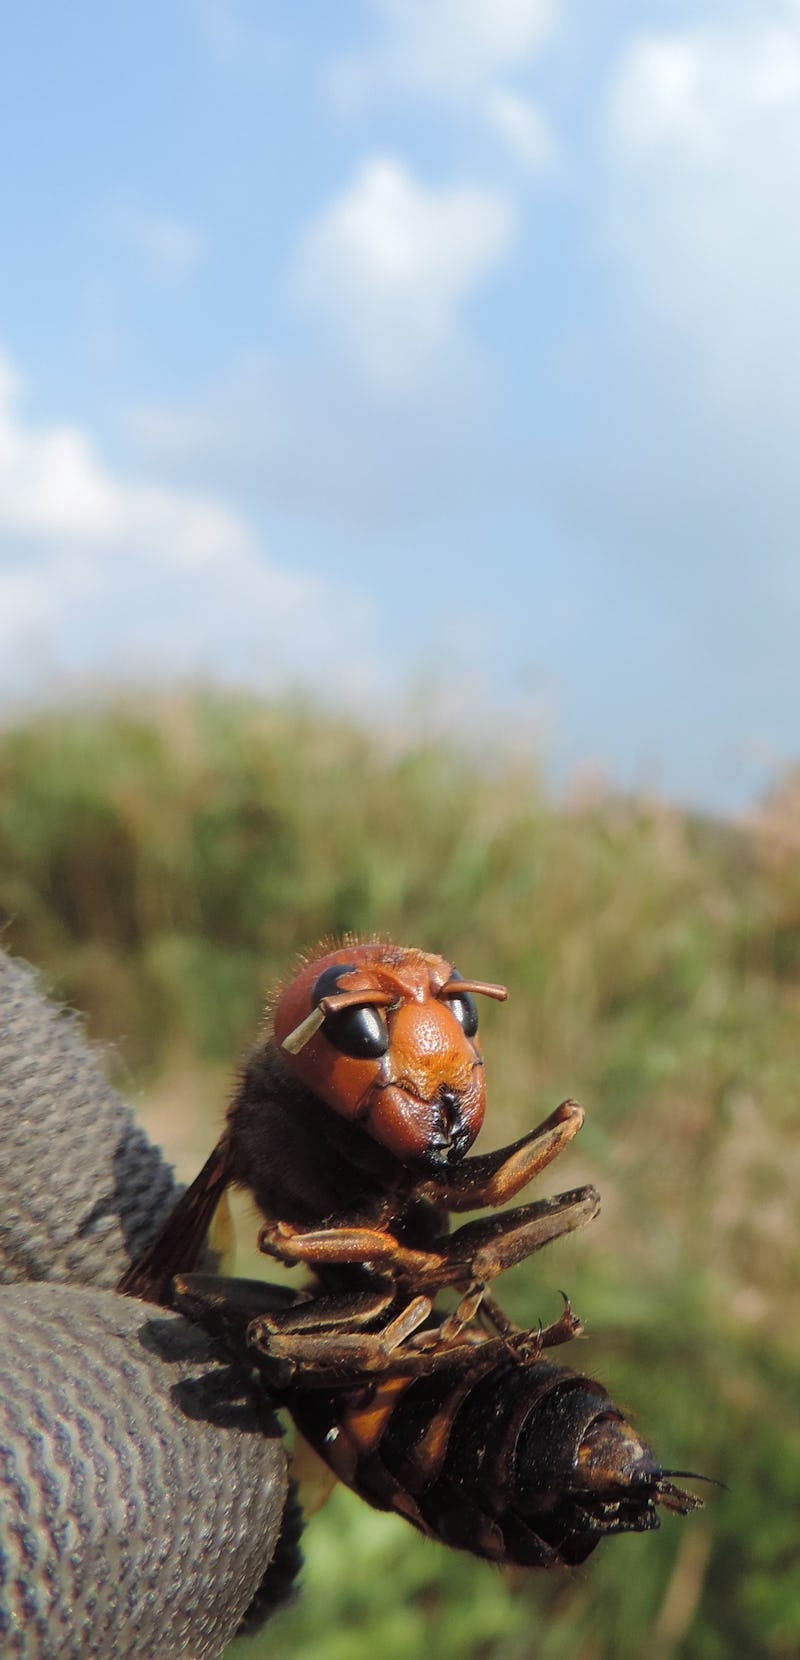 Asian giant hornet caught with fingers